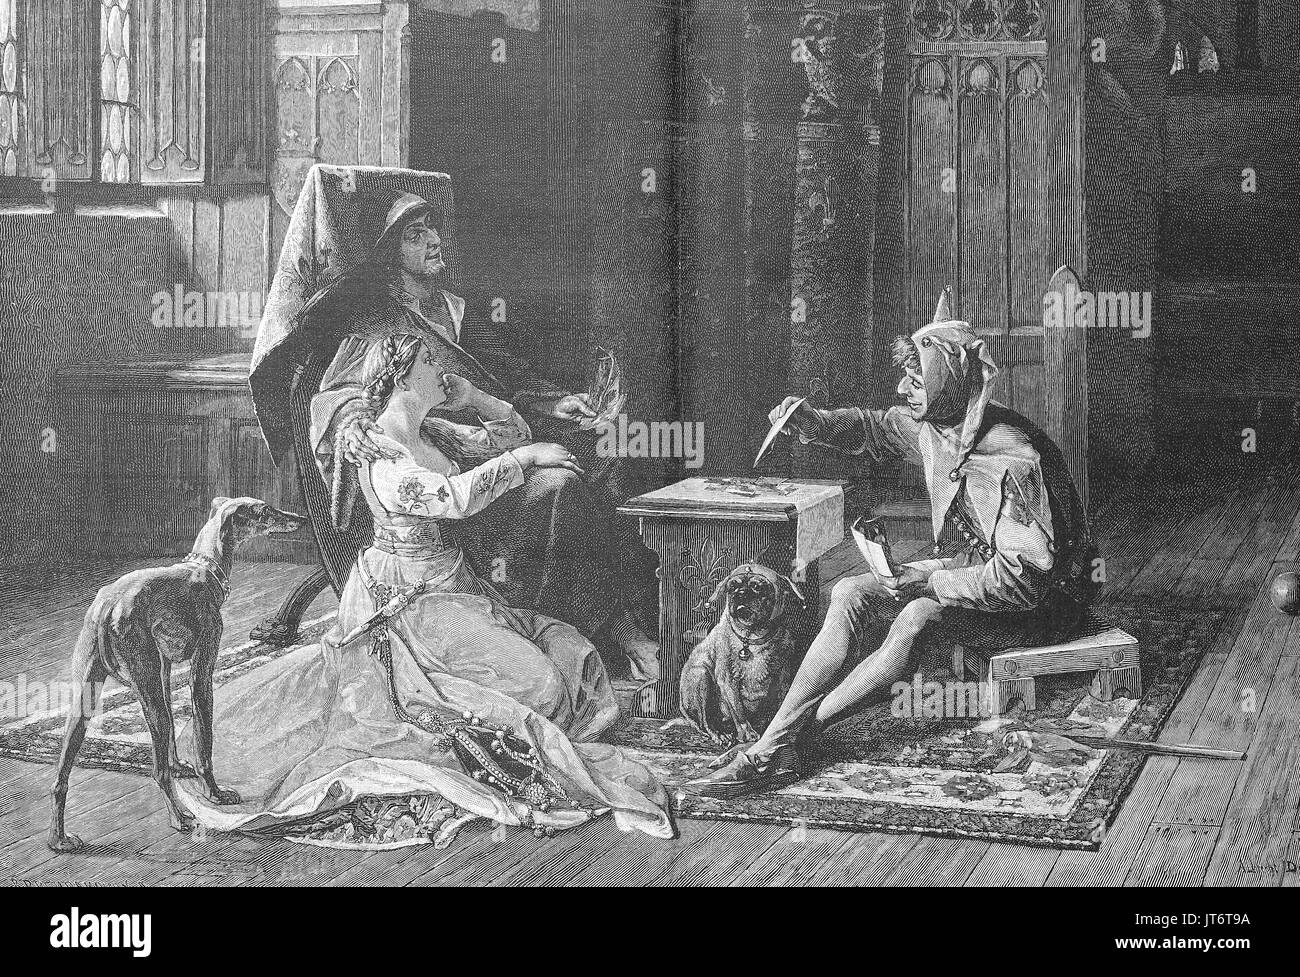 King Charles VI of France. Amusement by a court jester, Charles VI, 1368 - 1422, called the Beloved and the Mad, was King of France from 1380 to his death, Digital improved reproduction of an image published between 1880 - 1885 Stock Photo